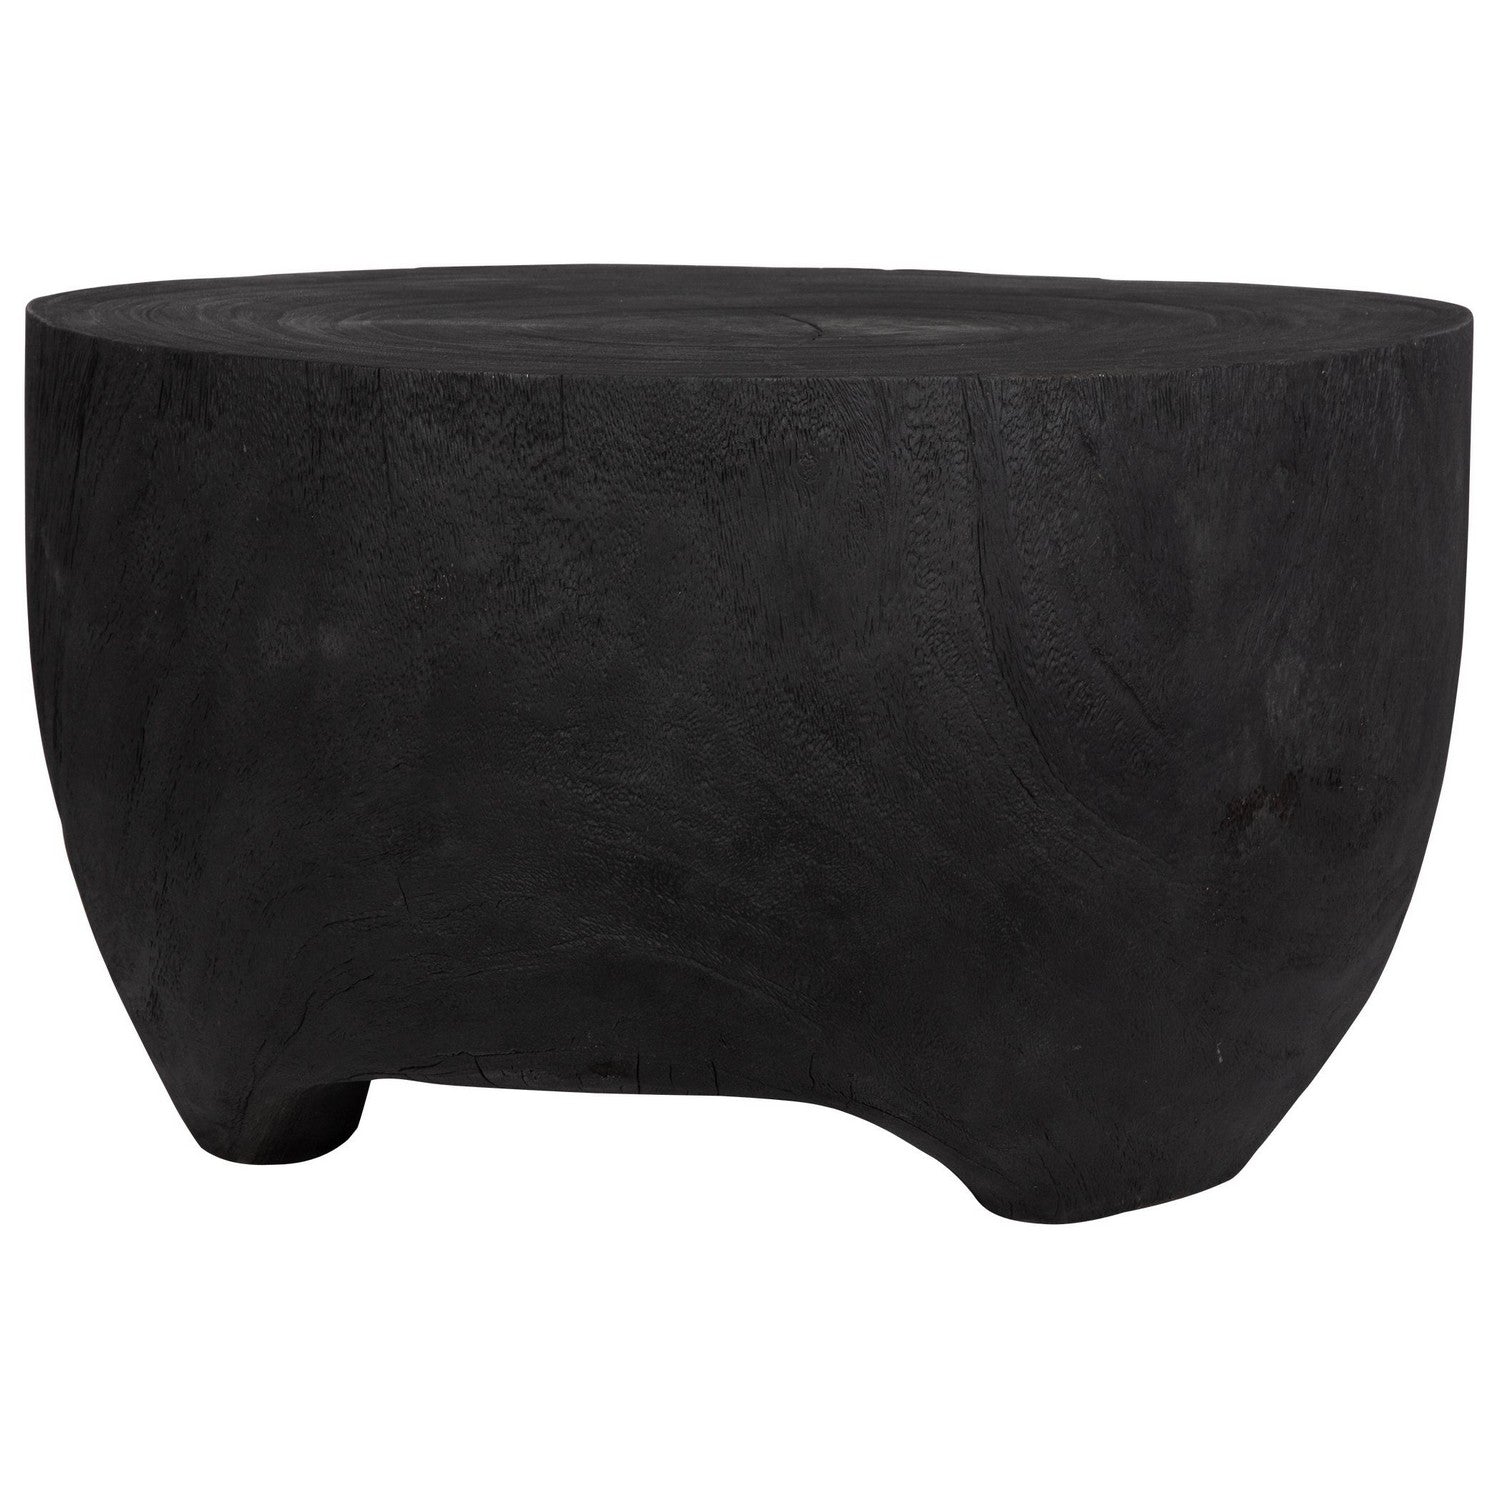 Uttermost - 22947 - Coffee Table - Elevate - Rich Black Highlighting